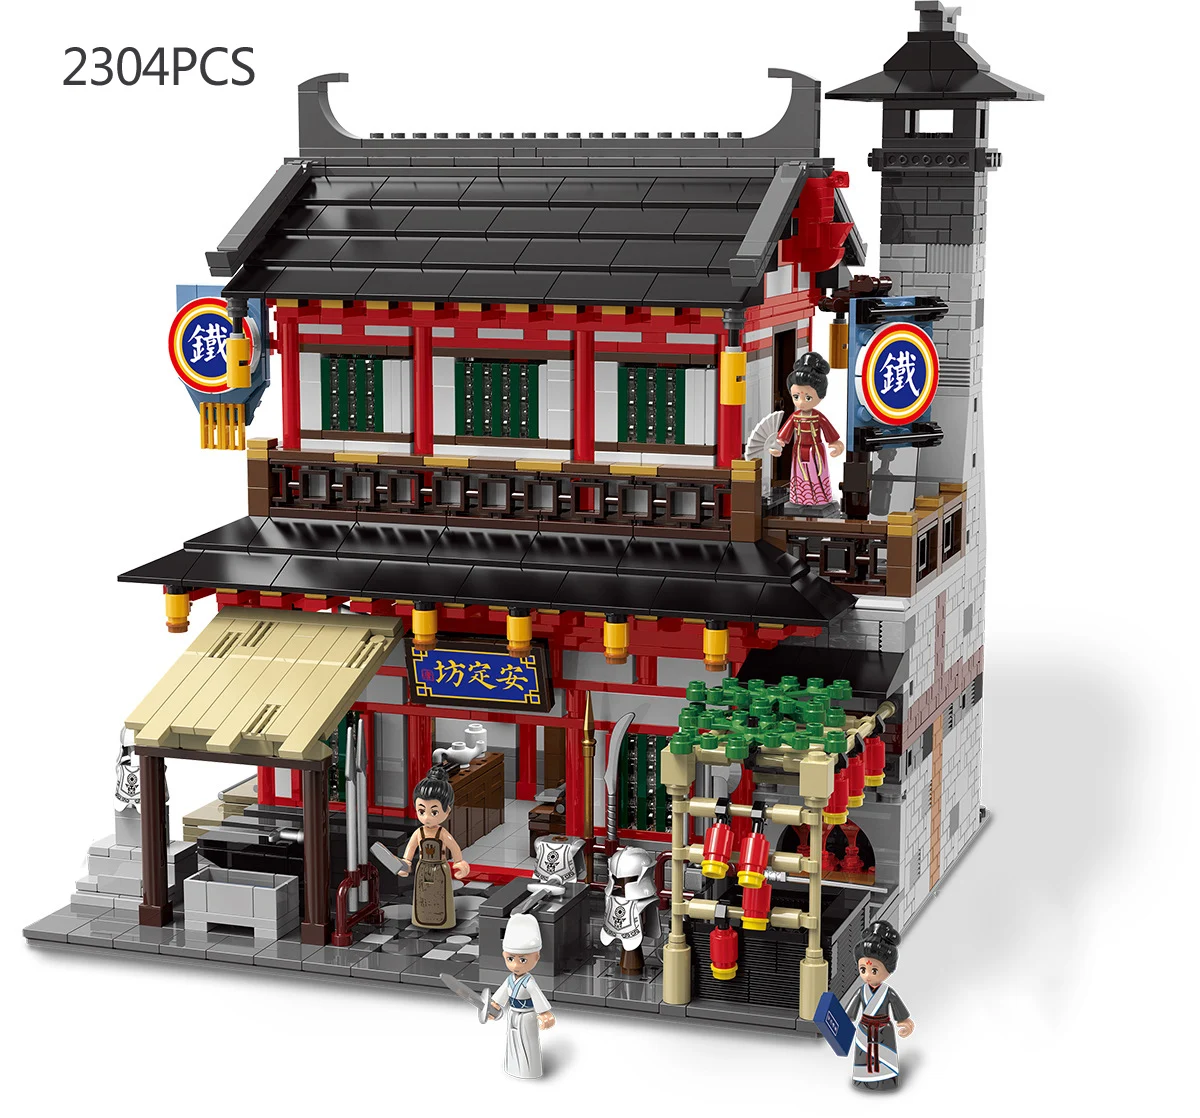 

Chinatown City Street View Architecture China Weapons Store Build Block Smithy Streetscape Model Brick Figure Assemble Toy